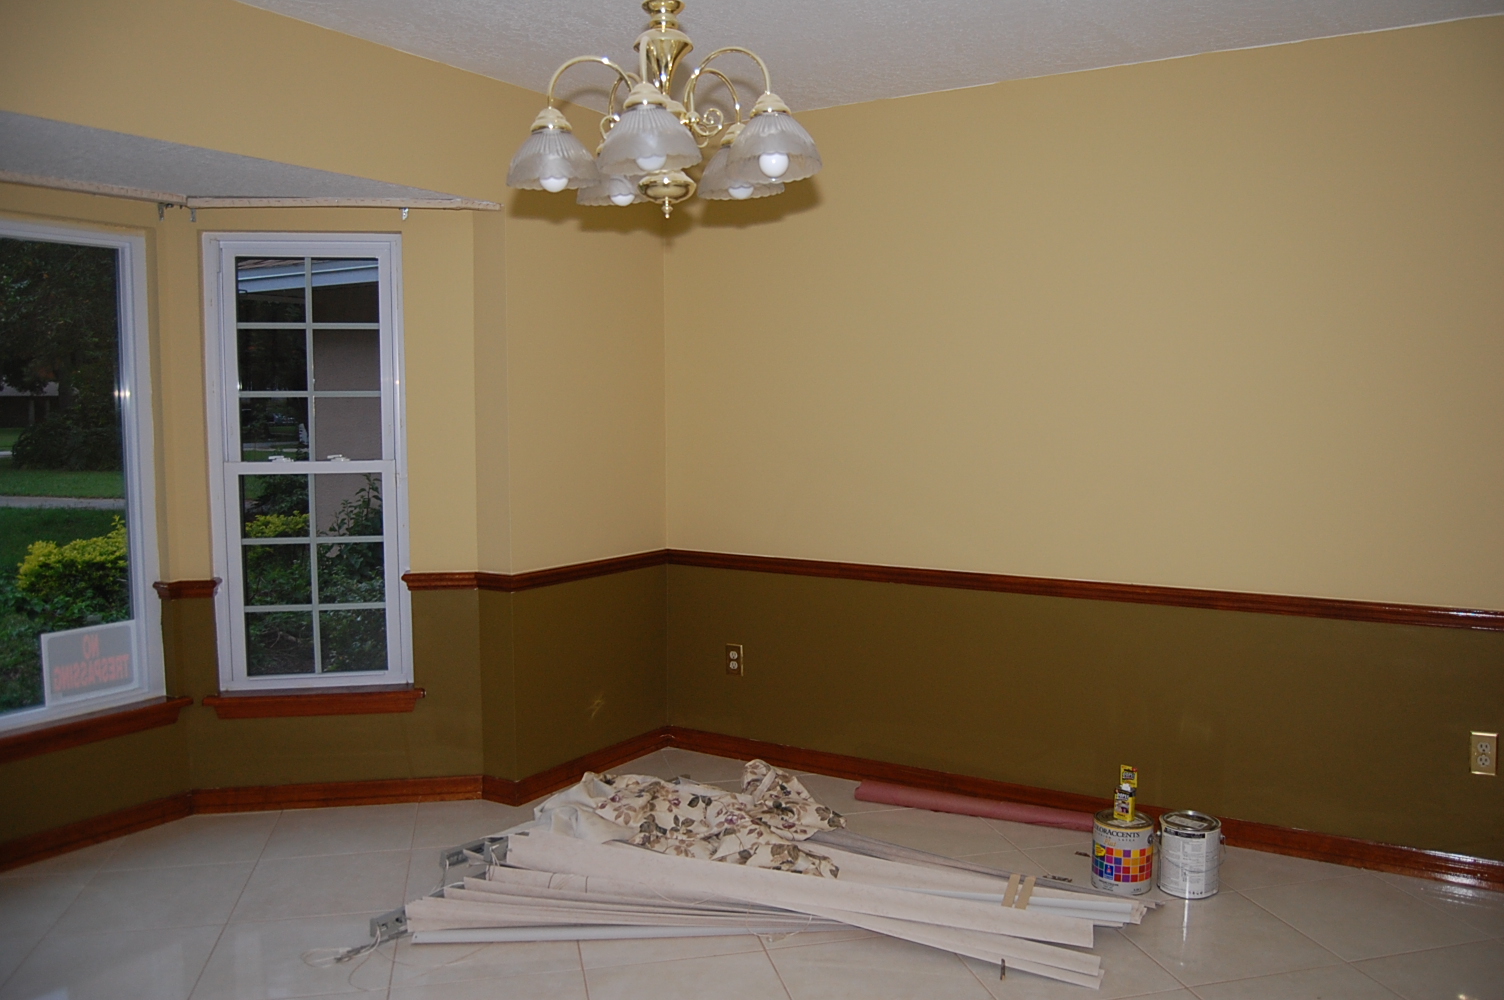 Crown Molding Style For 8 Foot Ceiling Paint Color